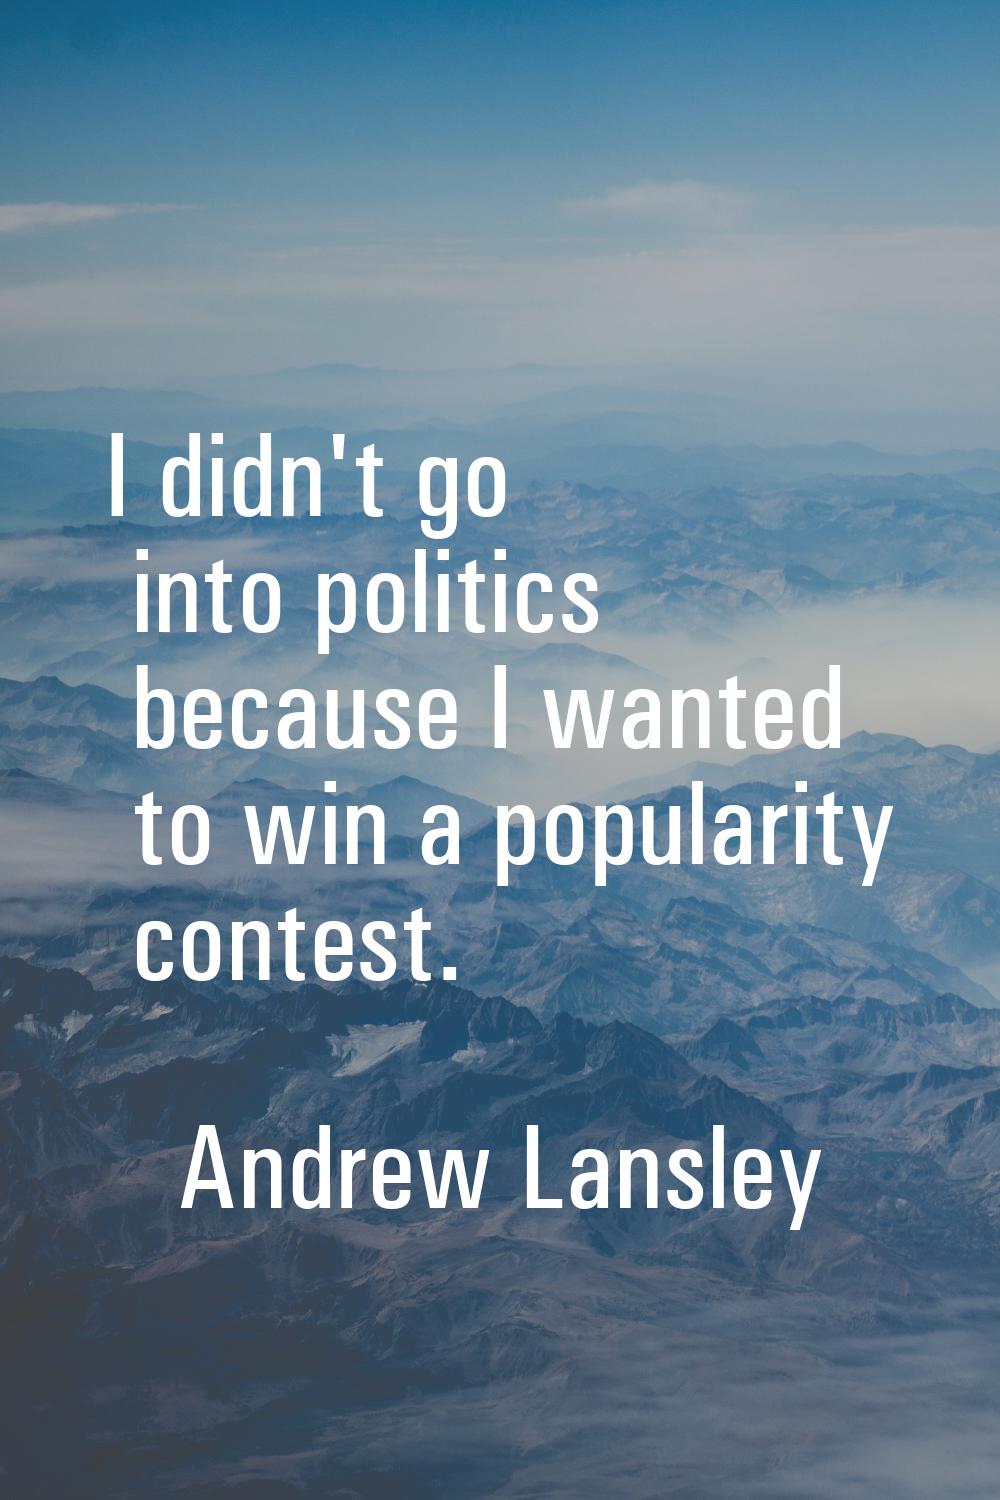 I didn't go into politics because I wanted to win a popularity contest.